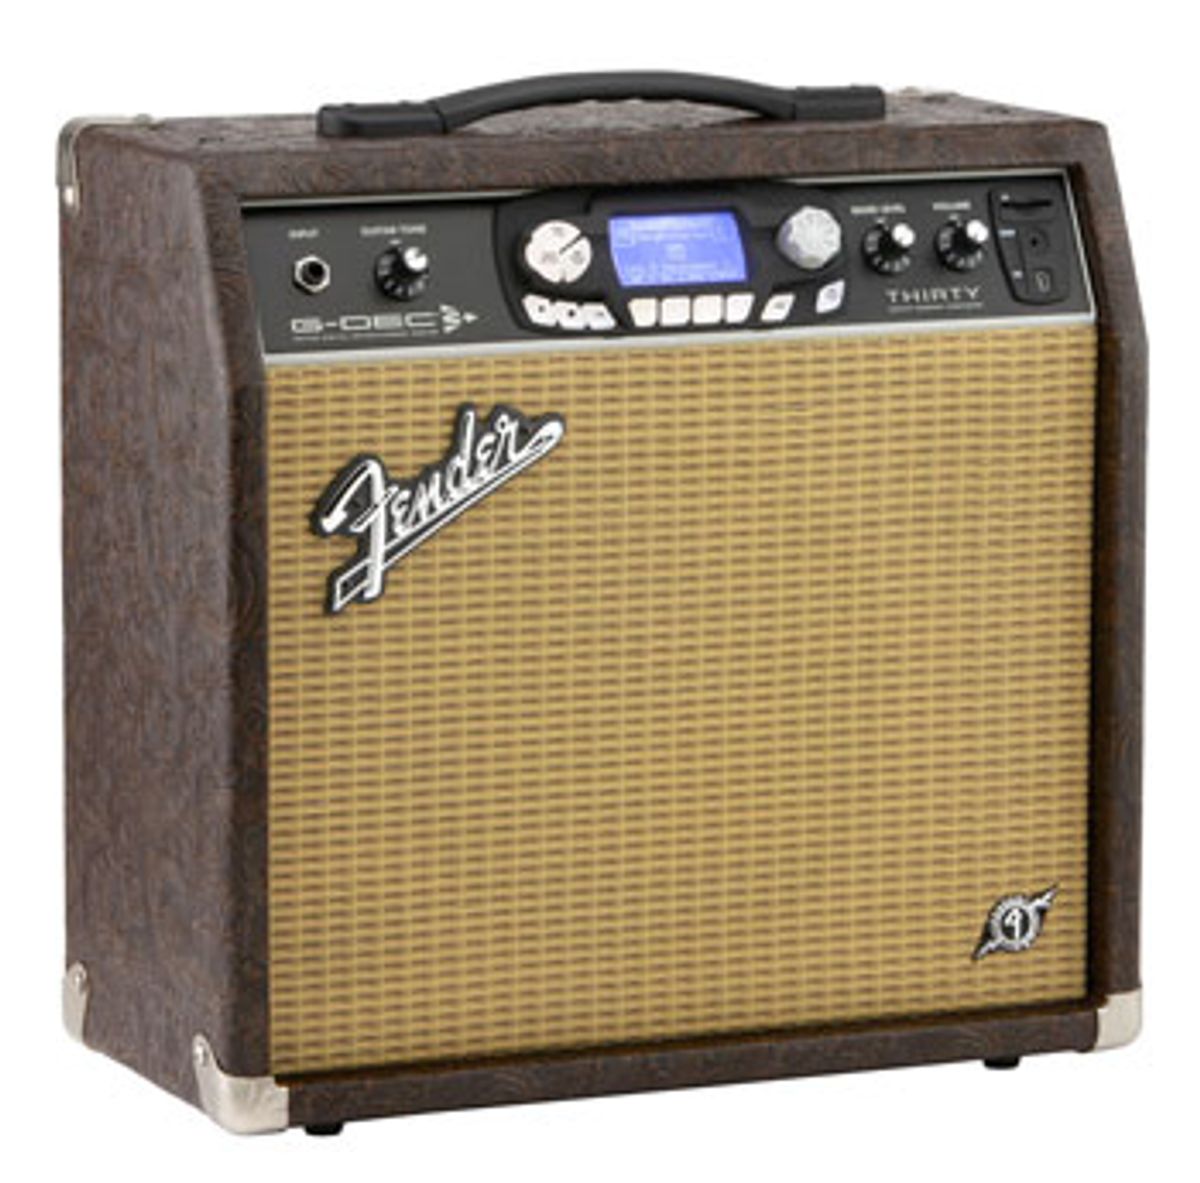 Fender Introduces Special Edition G-DEC 3 Thirty Blues, Metal, and Country Amps